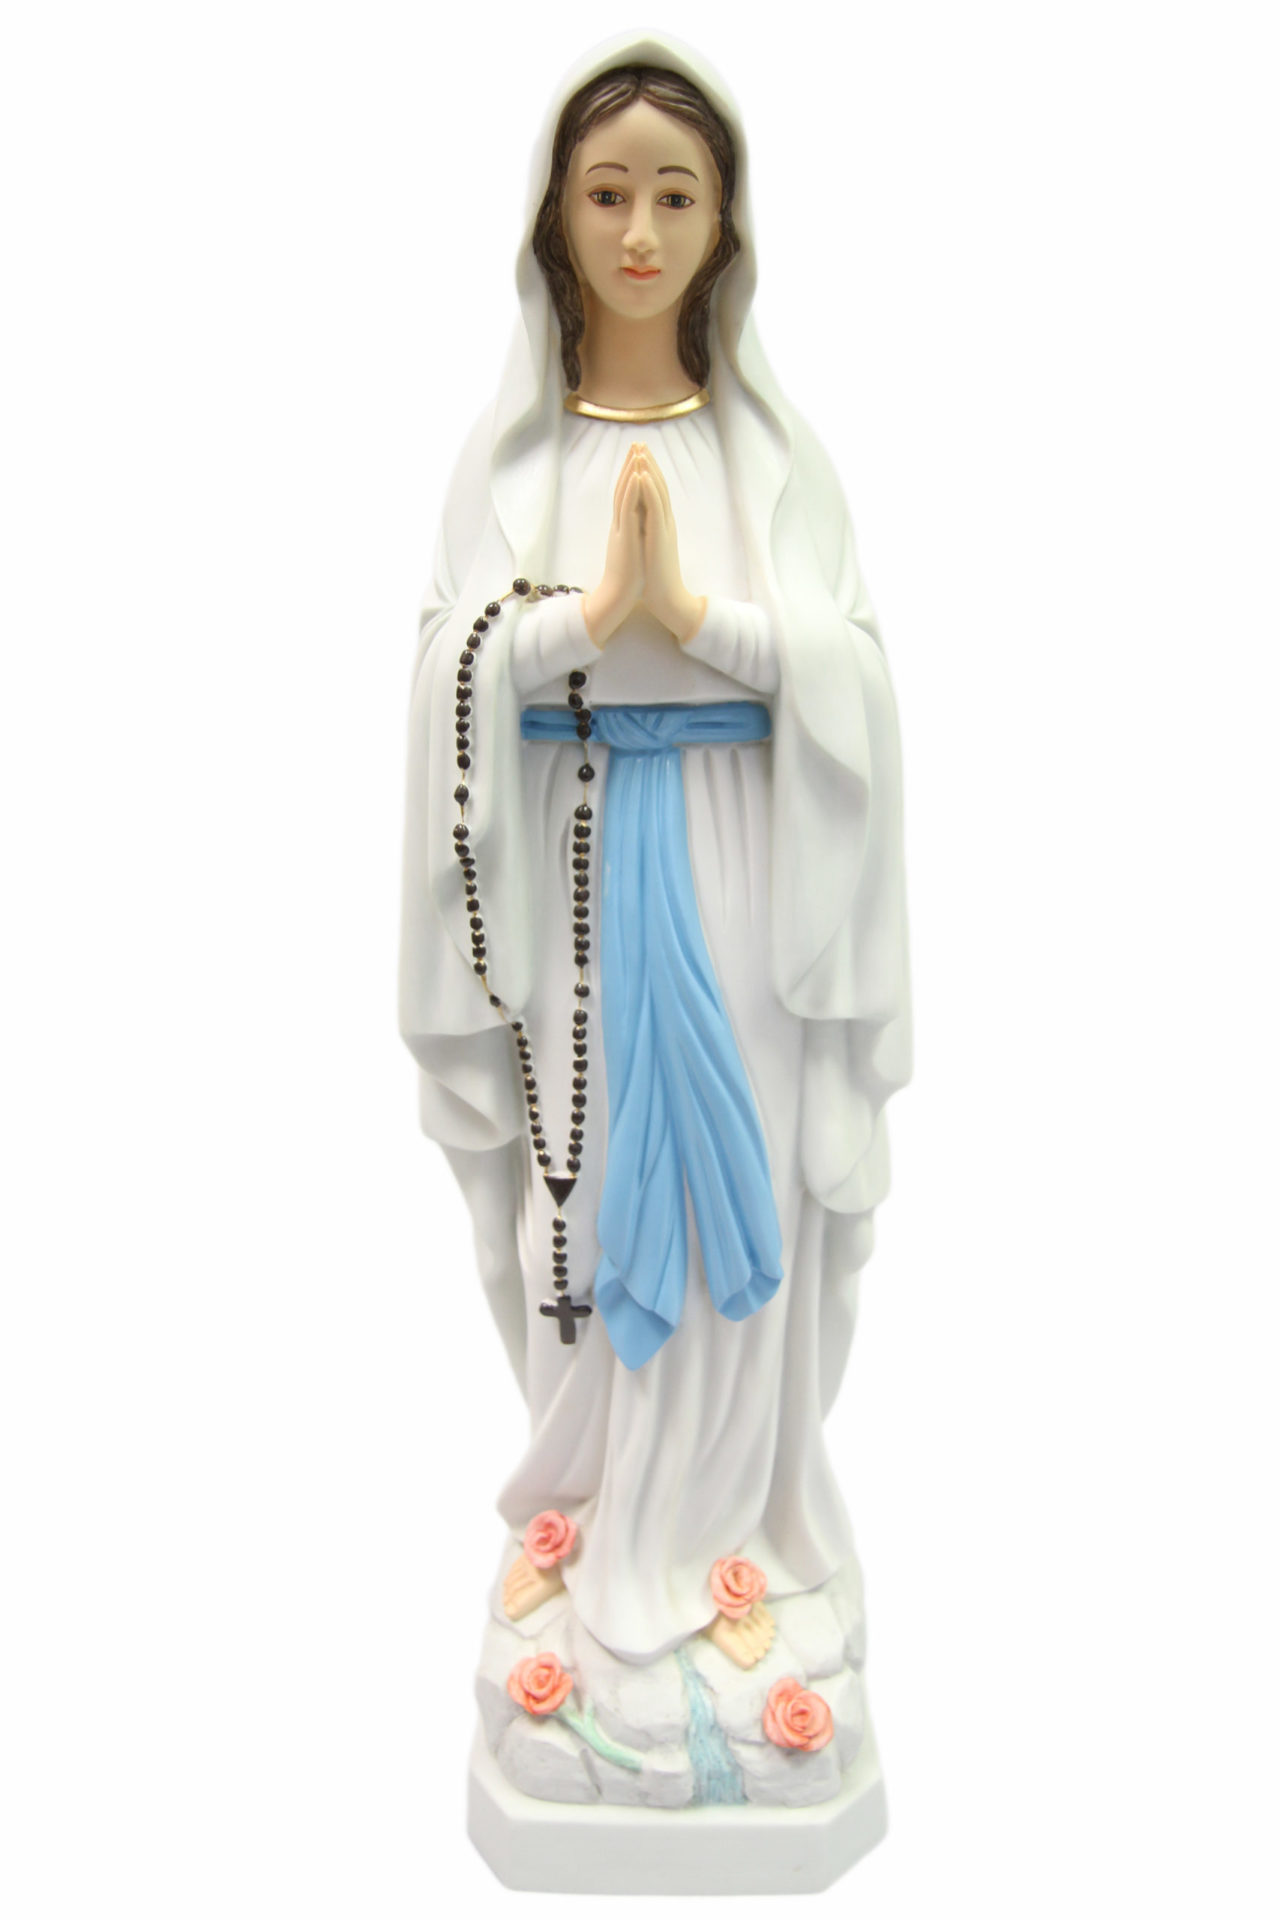 27″ Our Lady of Lourdes